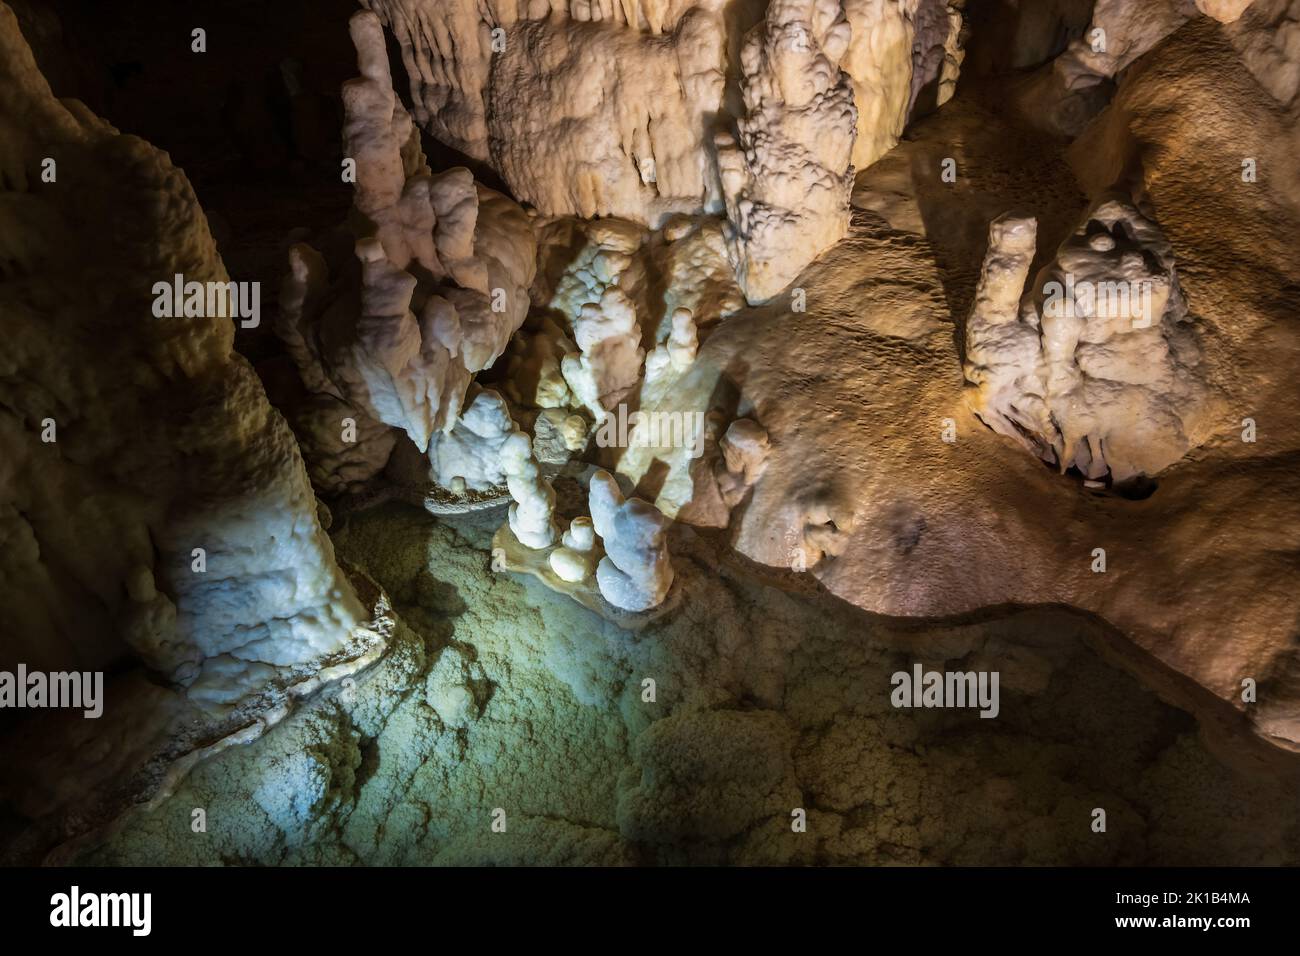 Smooth rock formations and water pool in Postojna Cave scenic interior in Slovenia. Stock Photo